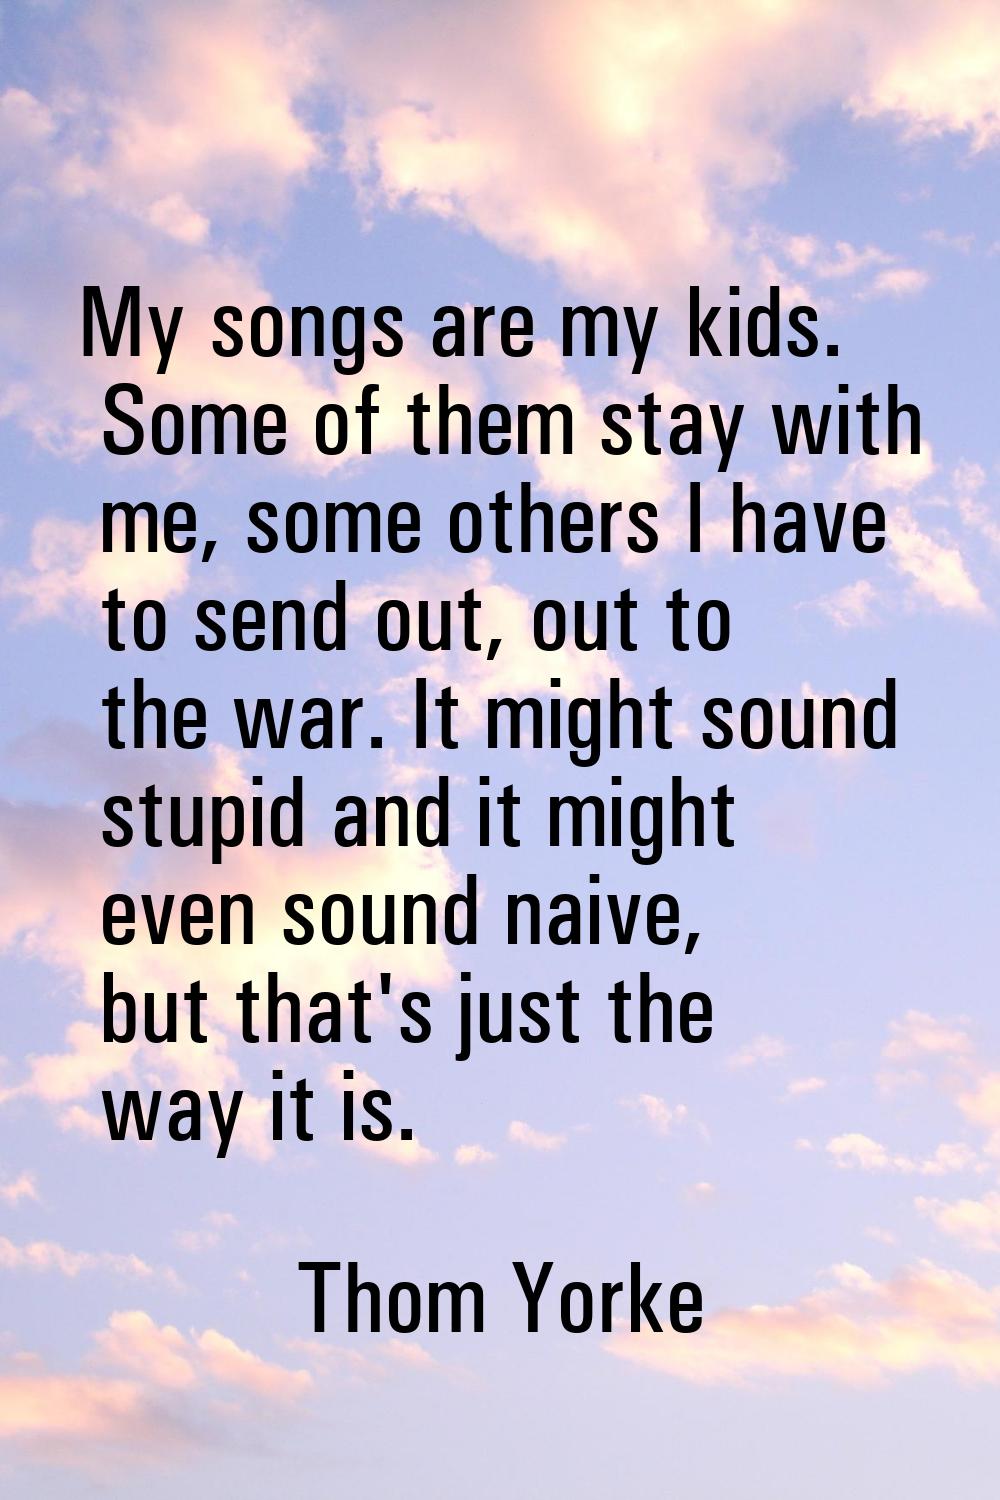 My songs are my kids. Some of them stay with me, some others I have to send out, out to the war. It